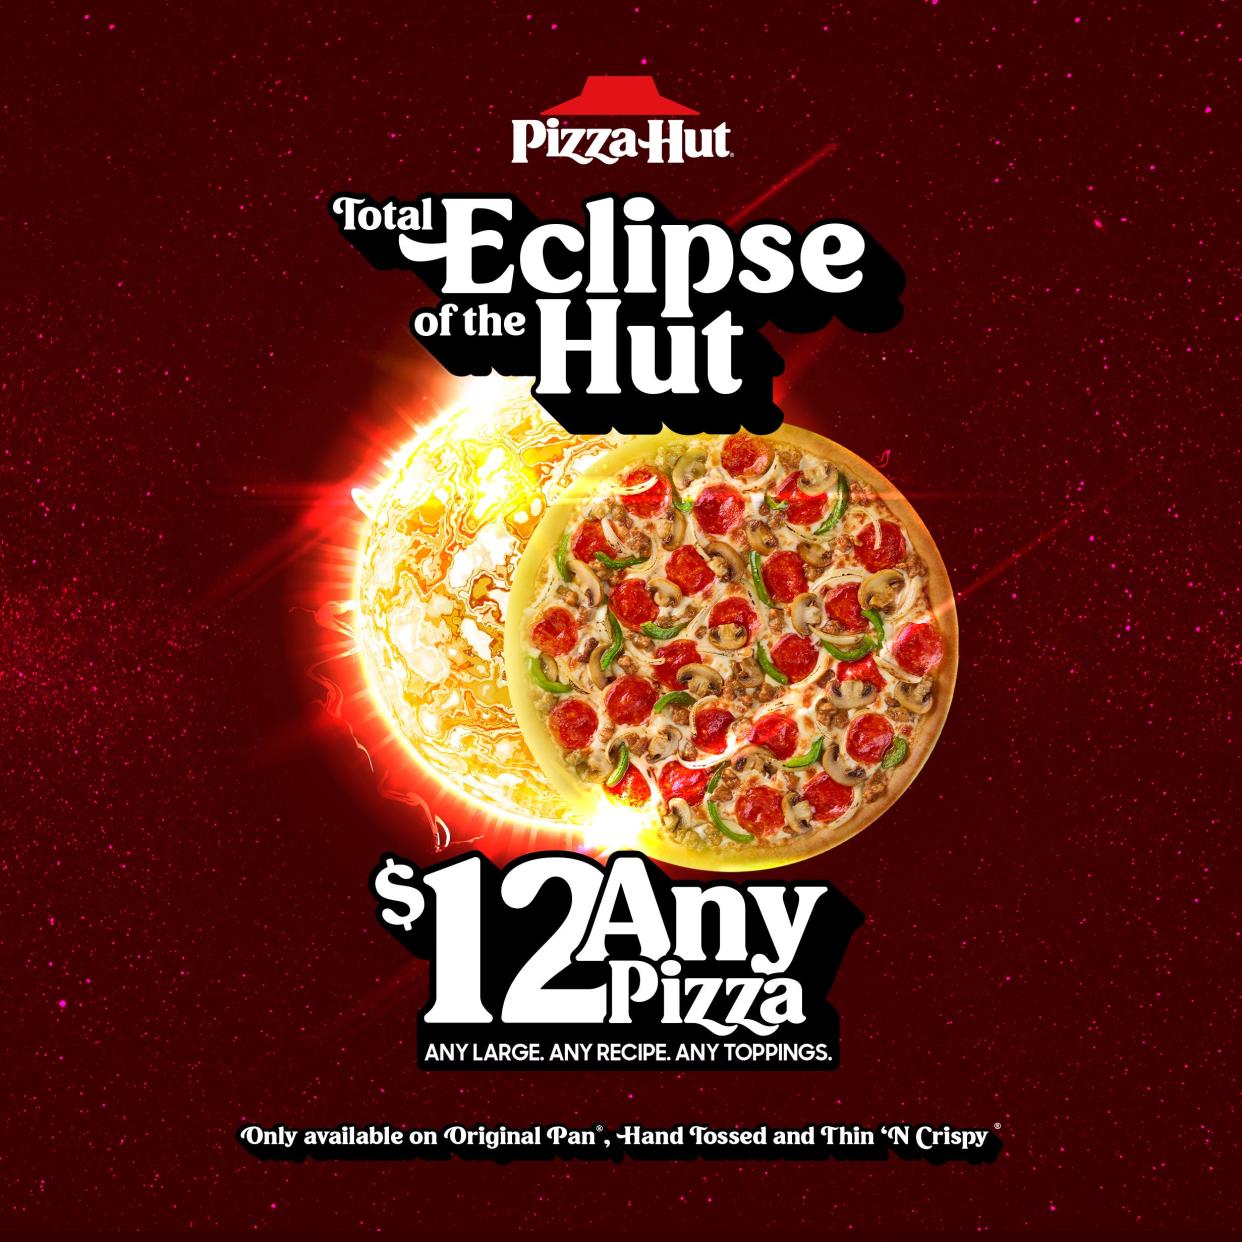 Pizza Hut will have $12 large pizzas available the on the day of the eclipse.